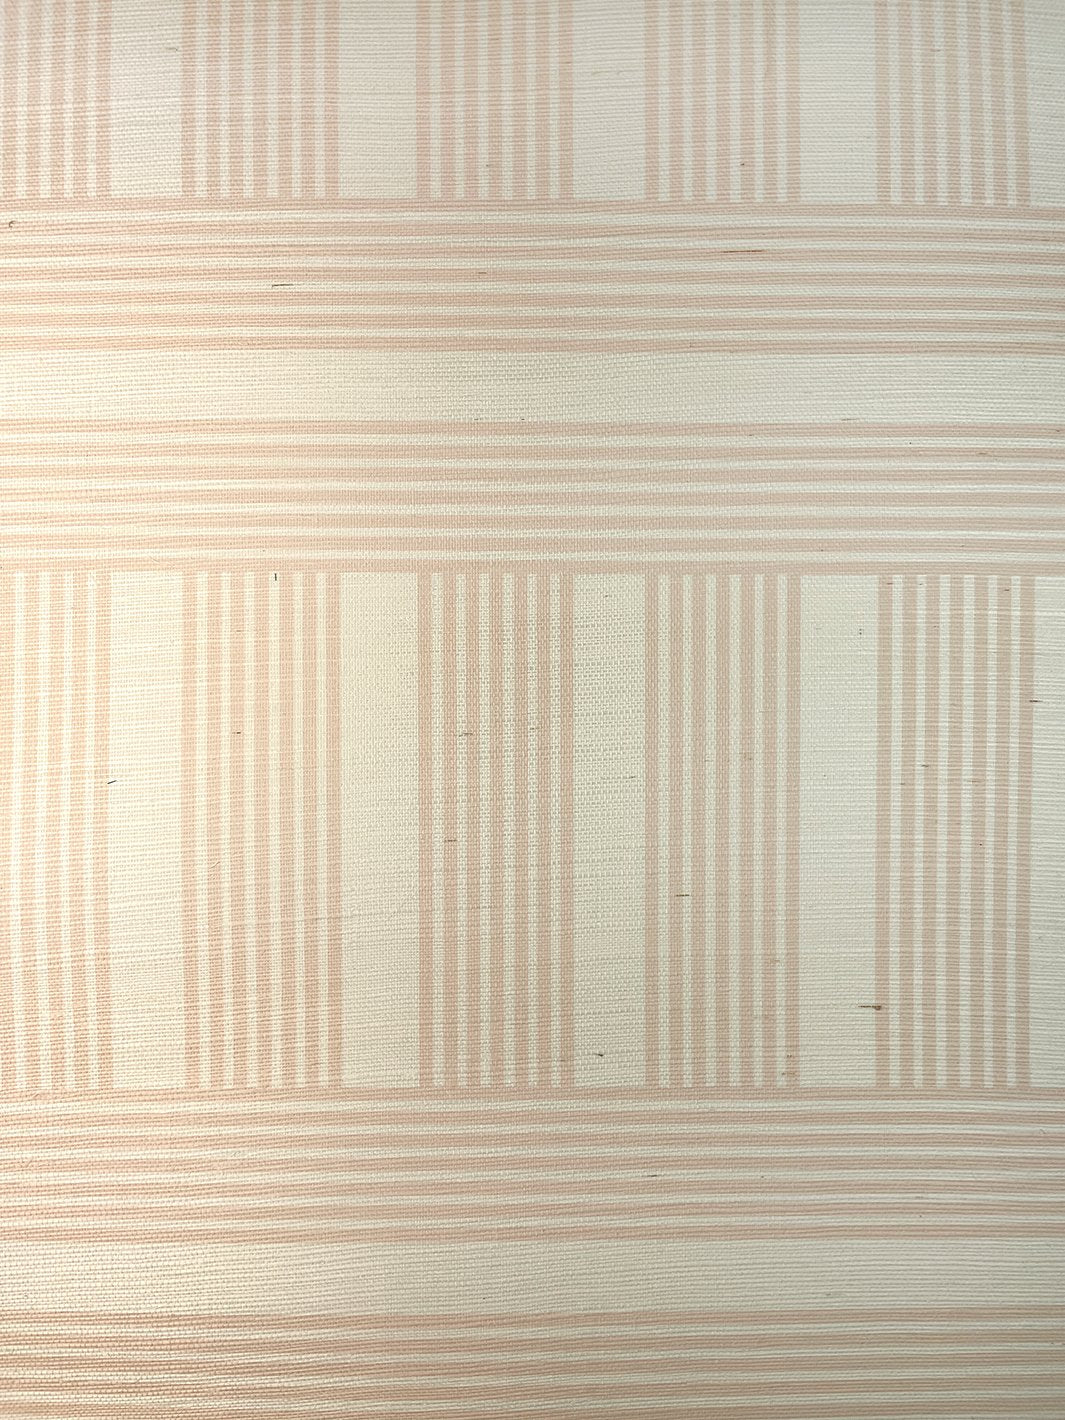 'Roman Holiday Grid' Grasscloth' Wallpaper by Barbie™ - Peach